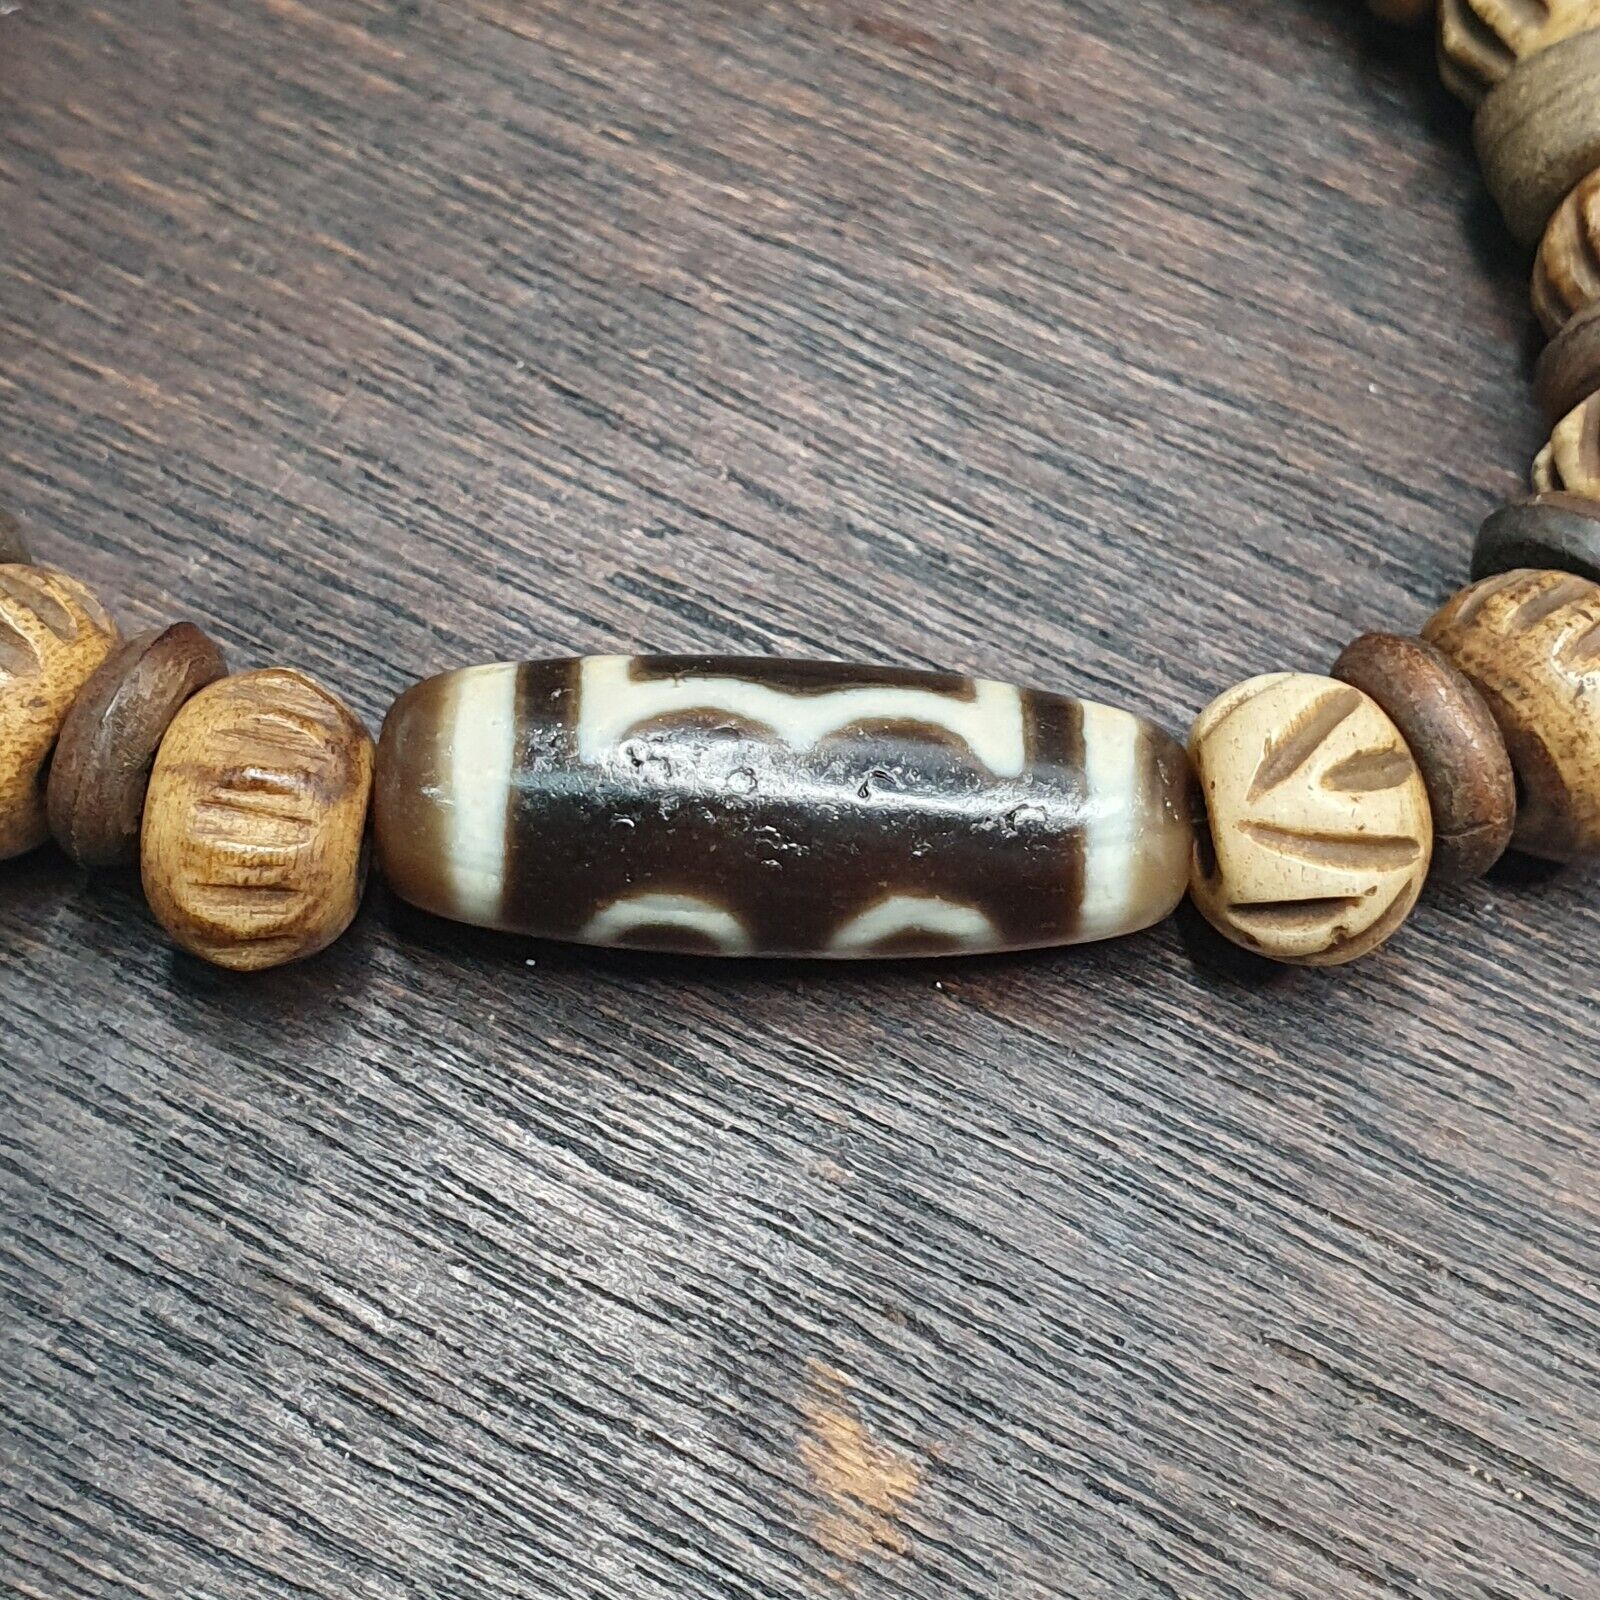 Protective Tibetan 3 Eyes and Lines Agate Dzi Bead Amulet carving beads Bracelet